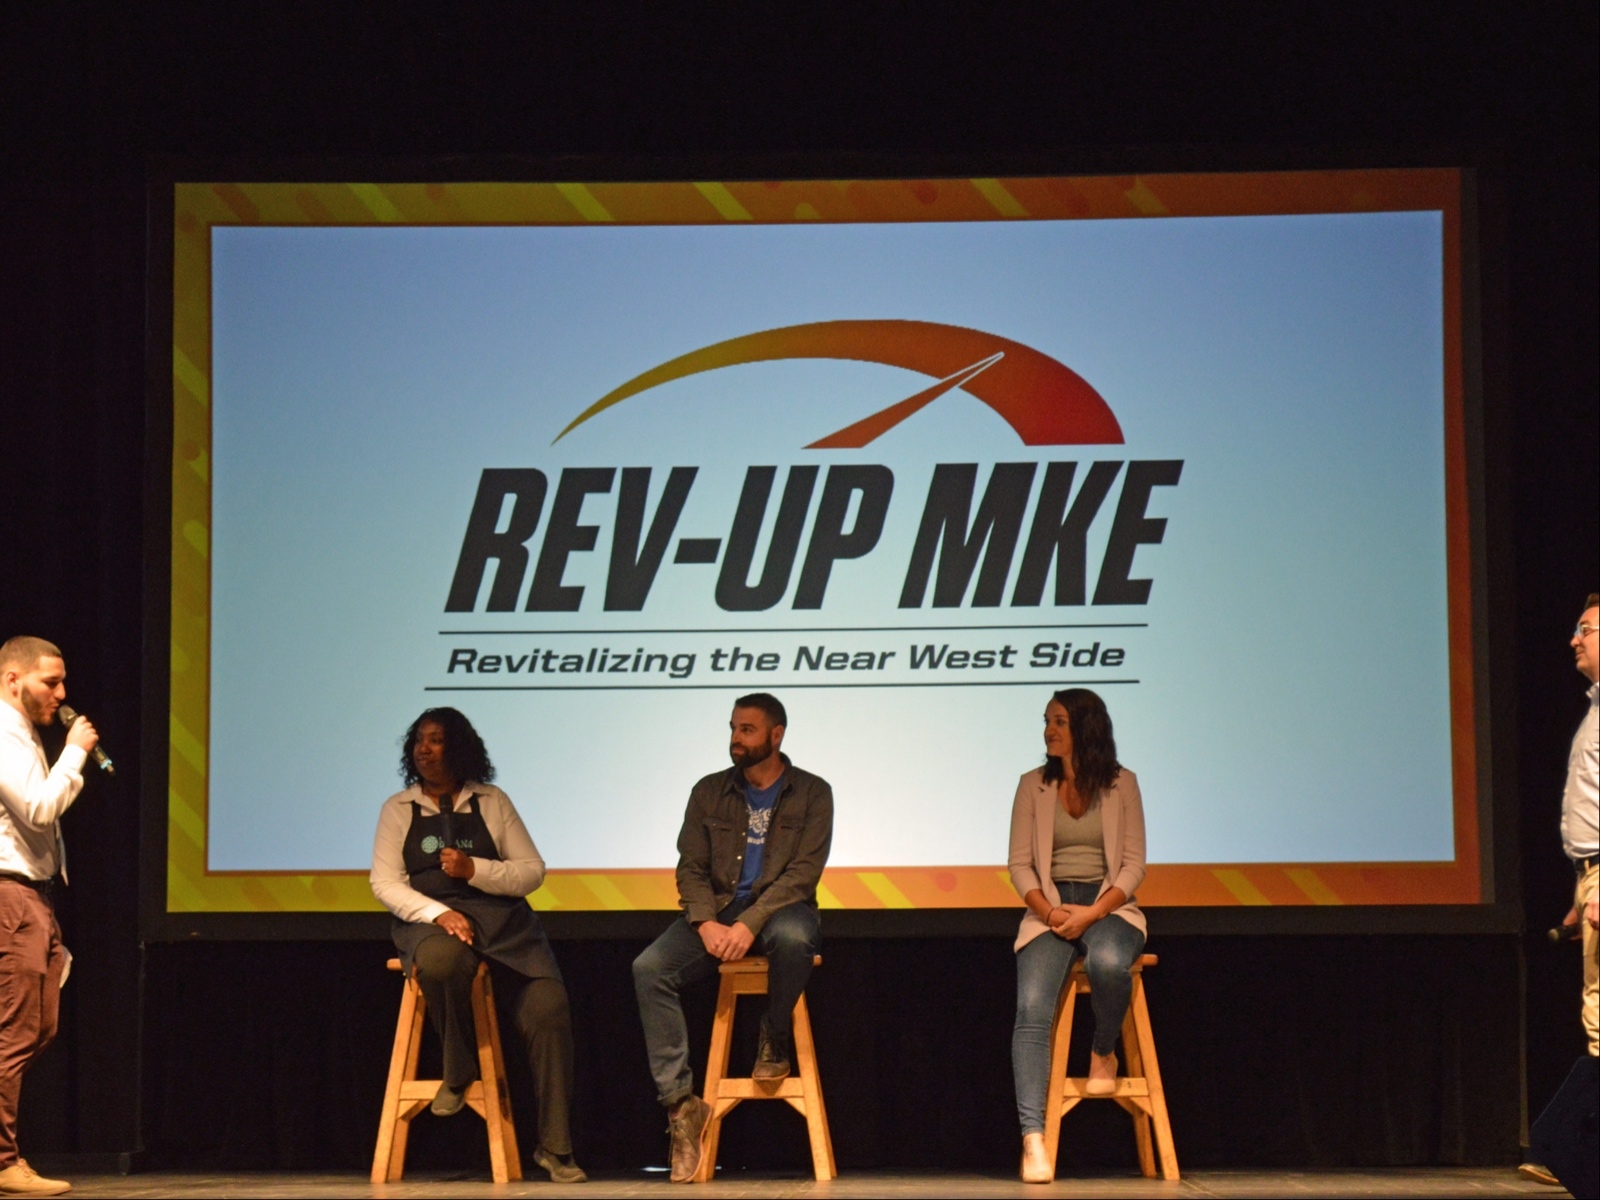 Rev-Up MKE finalists prepare to pitch their Near West Side business dreams